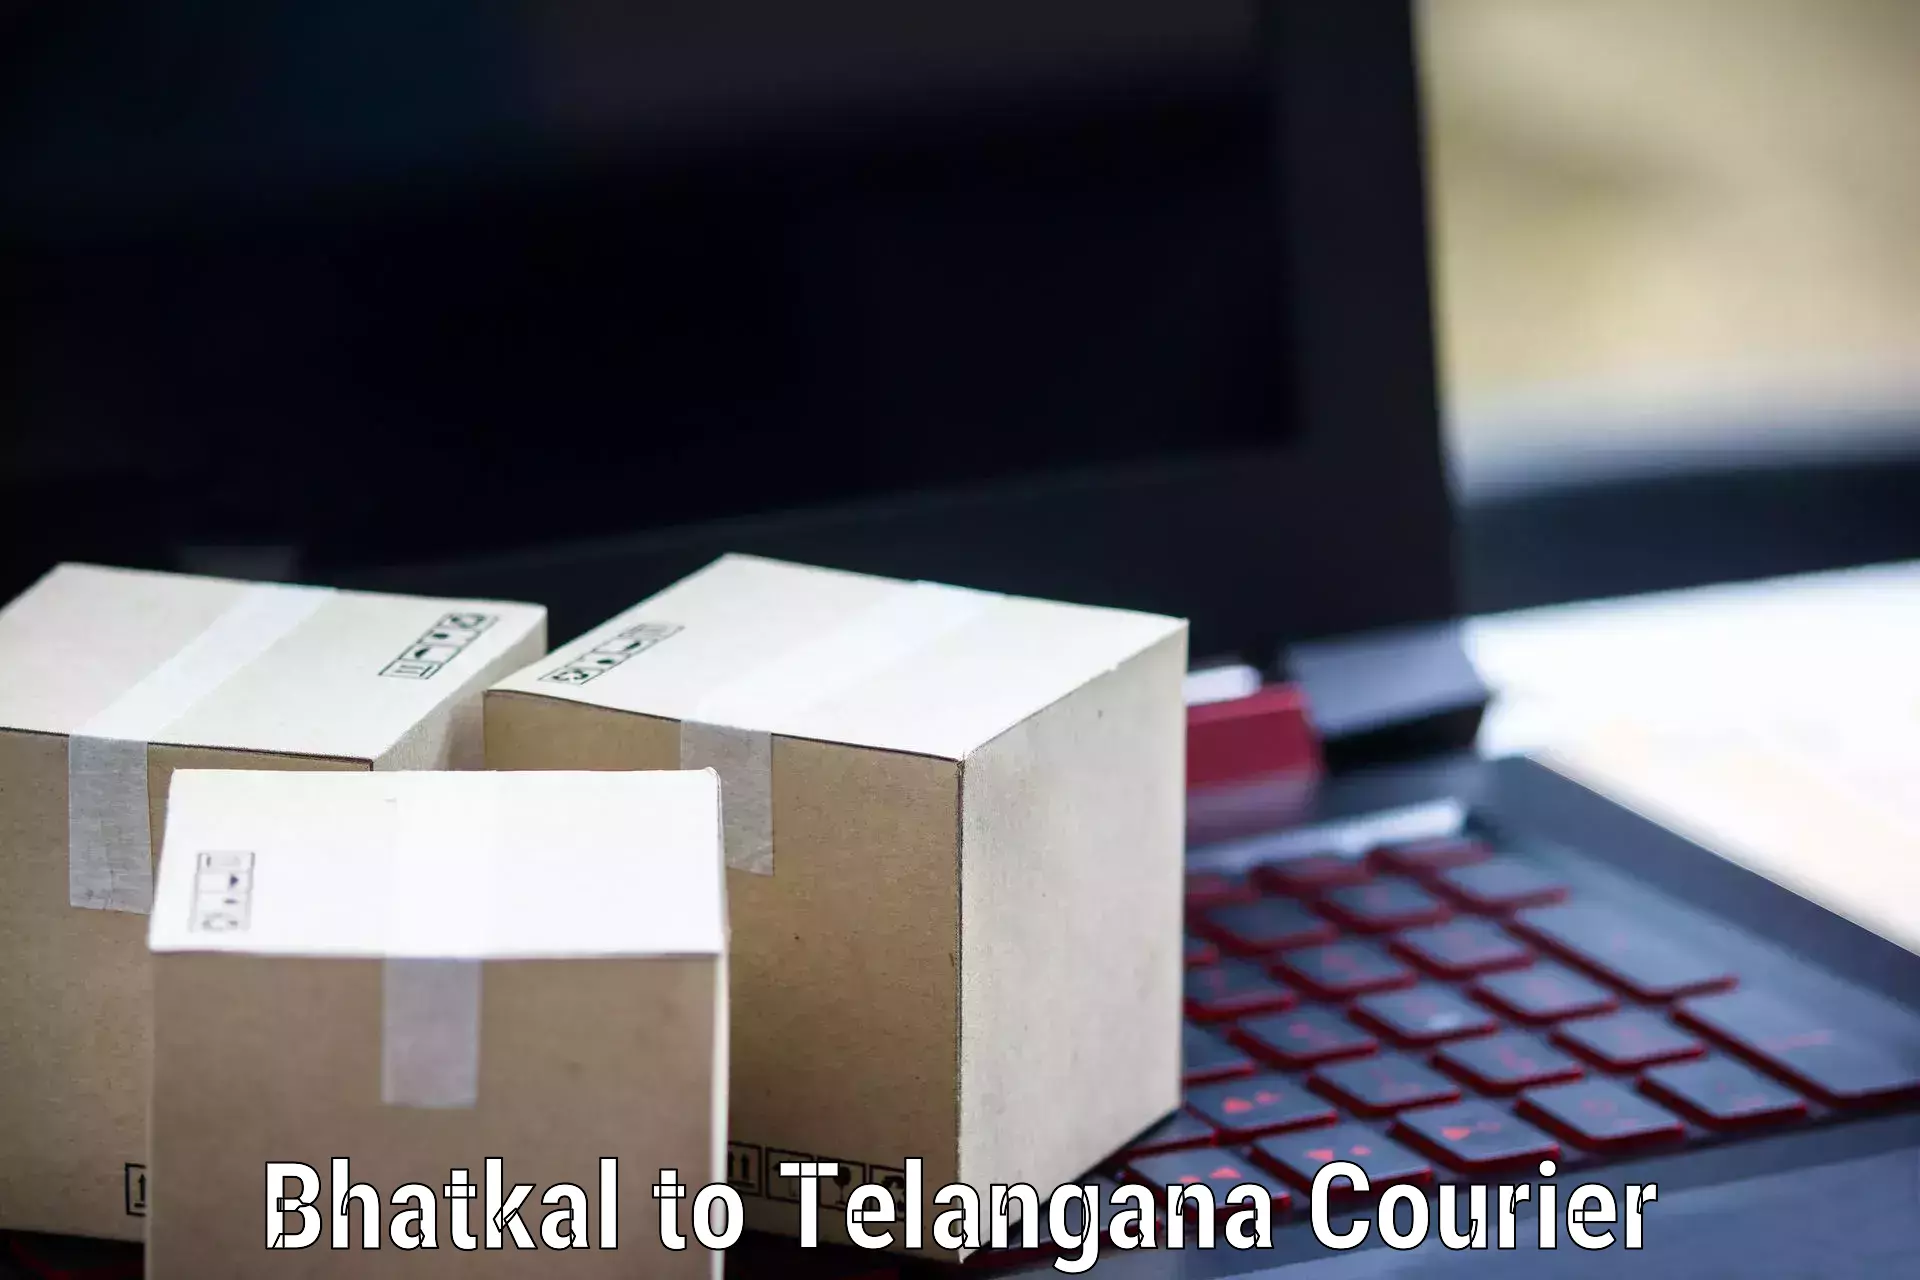 Courier services in Bhatkal to Choppadandi